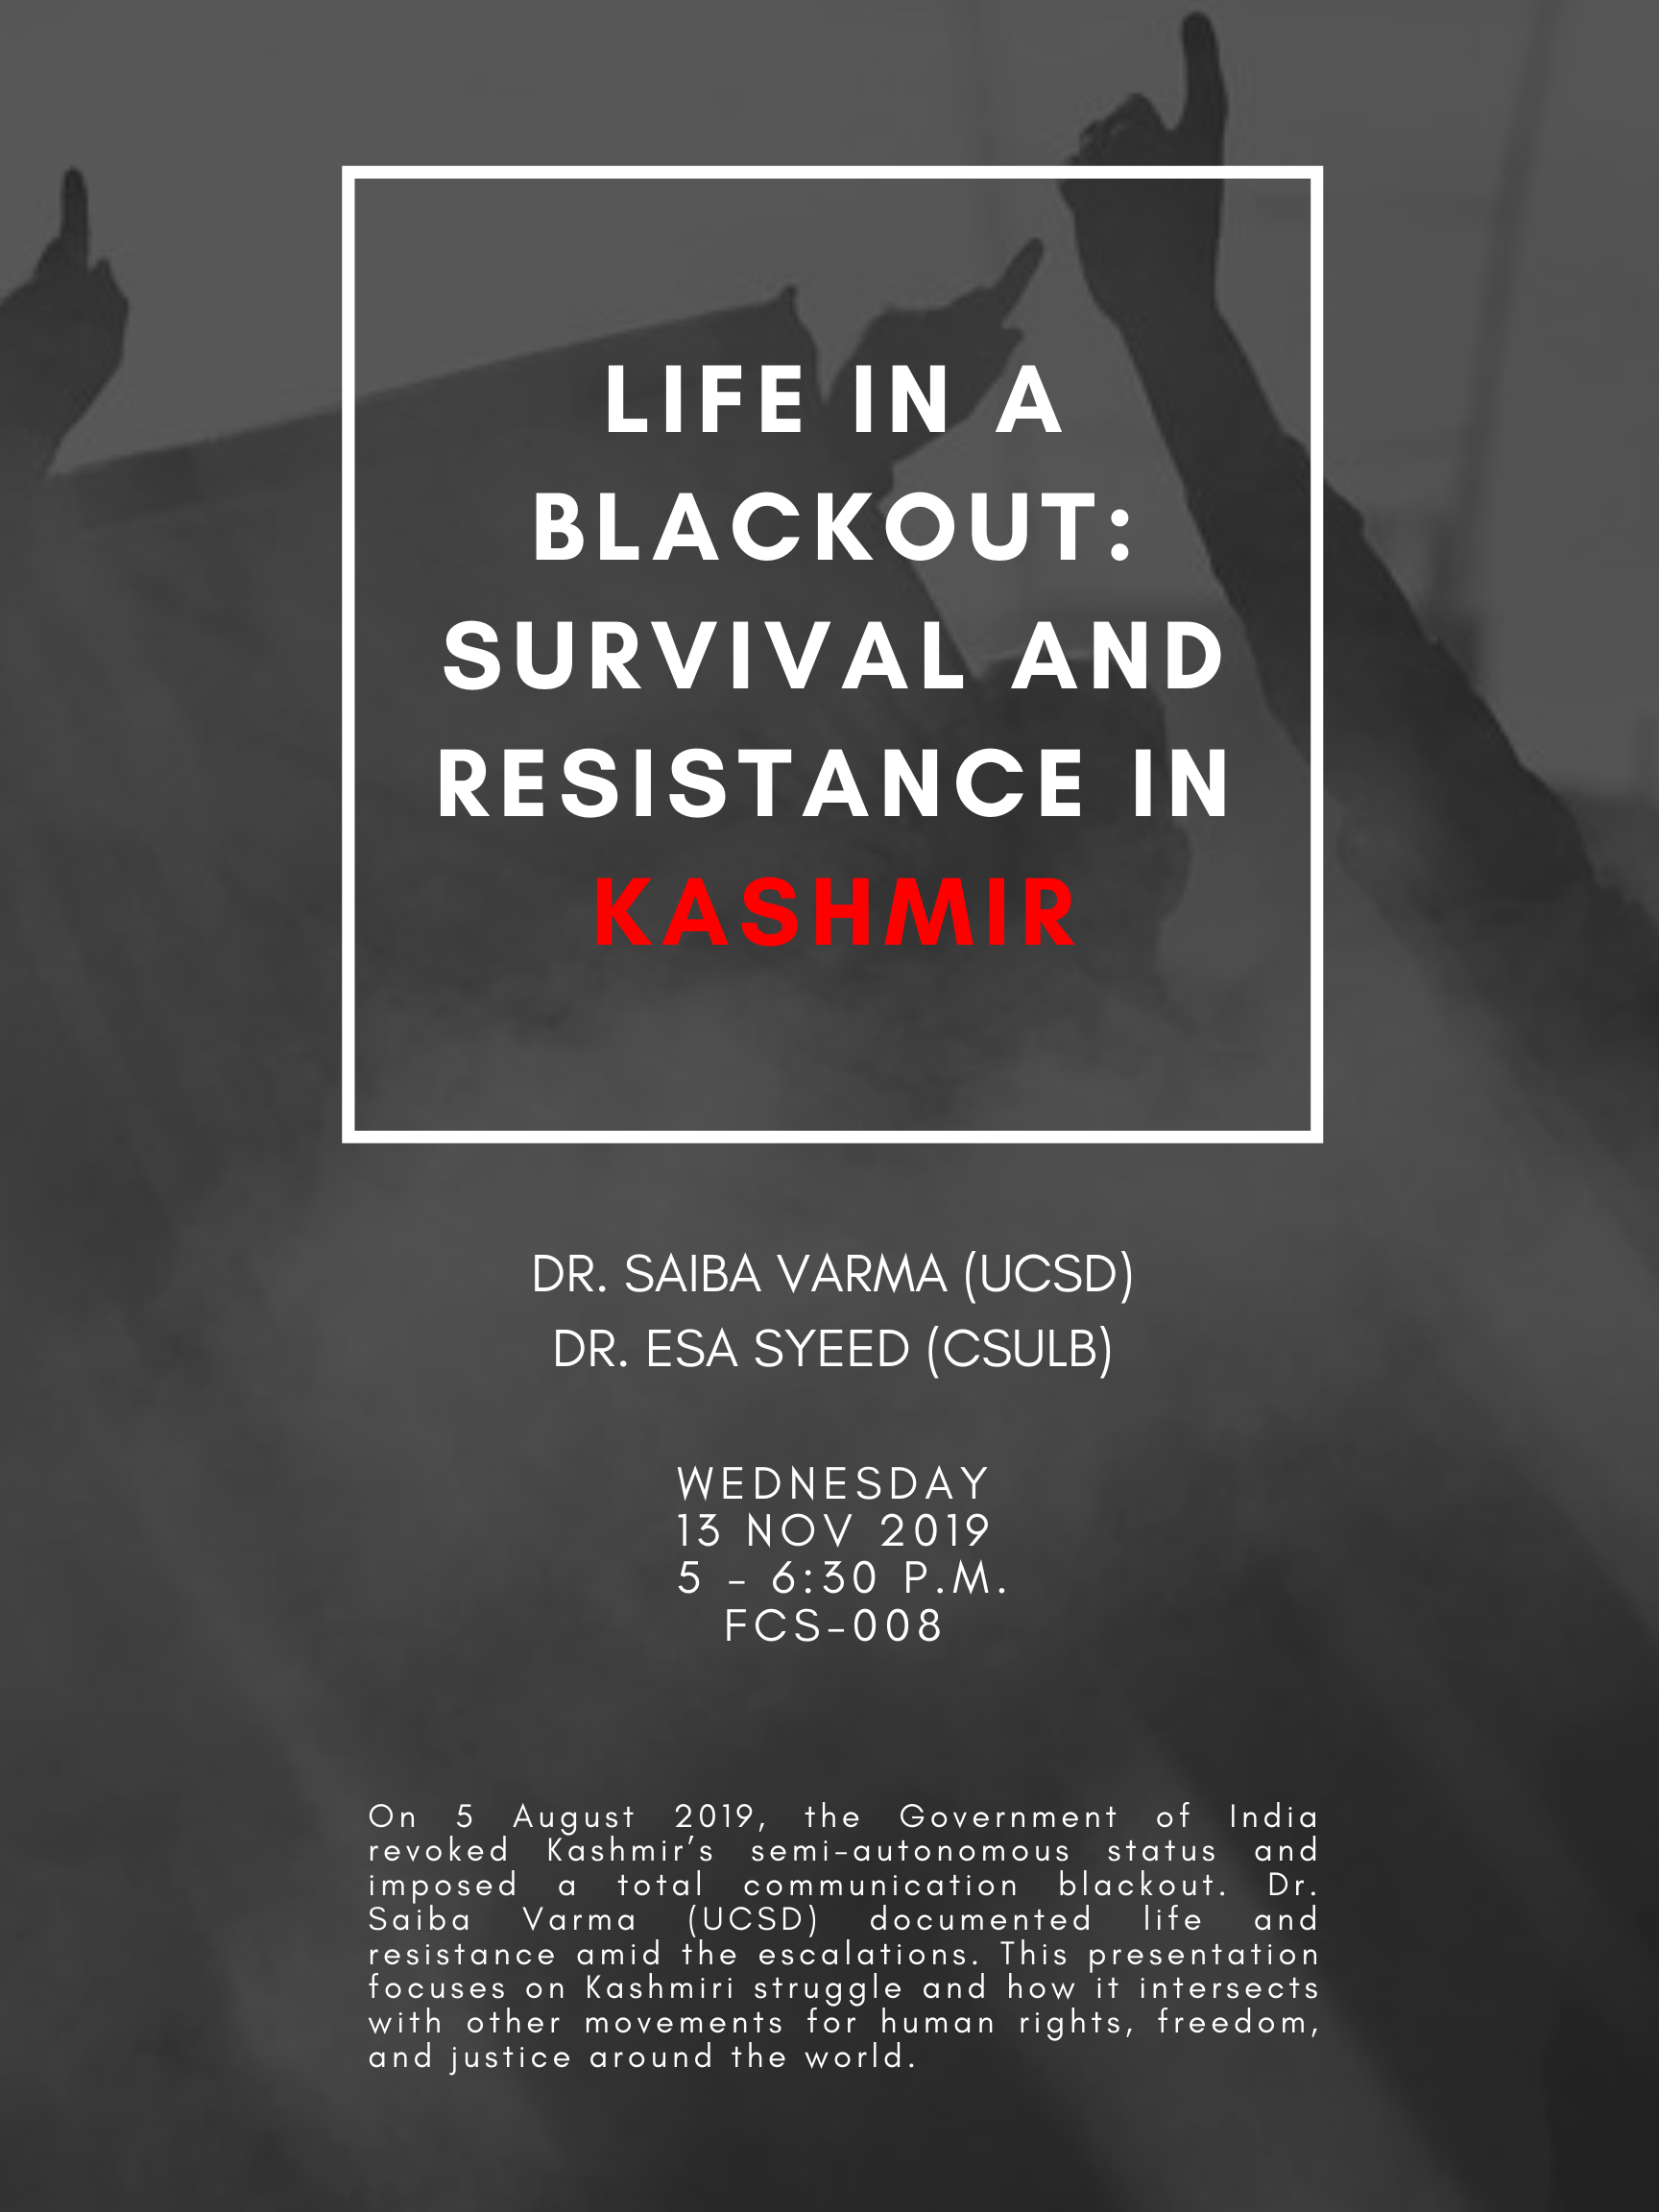 Life in a Blackout: Survival and Resistance in Kashmir